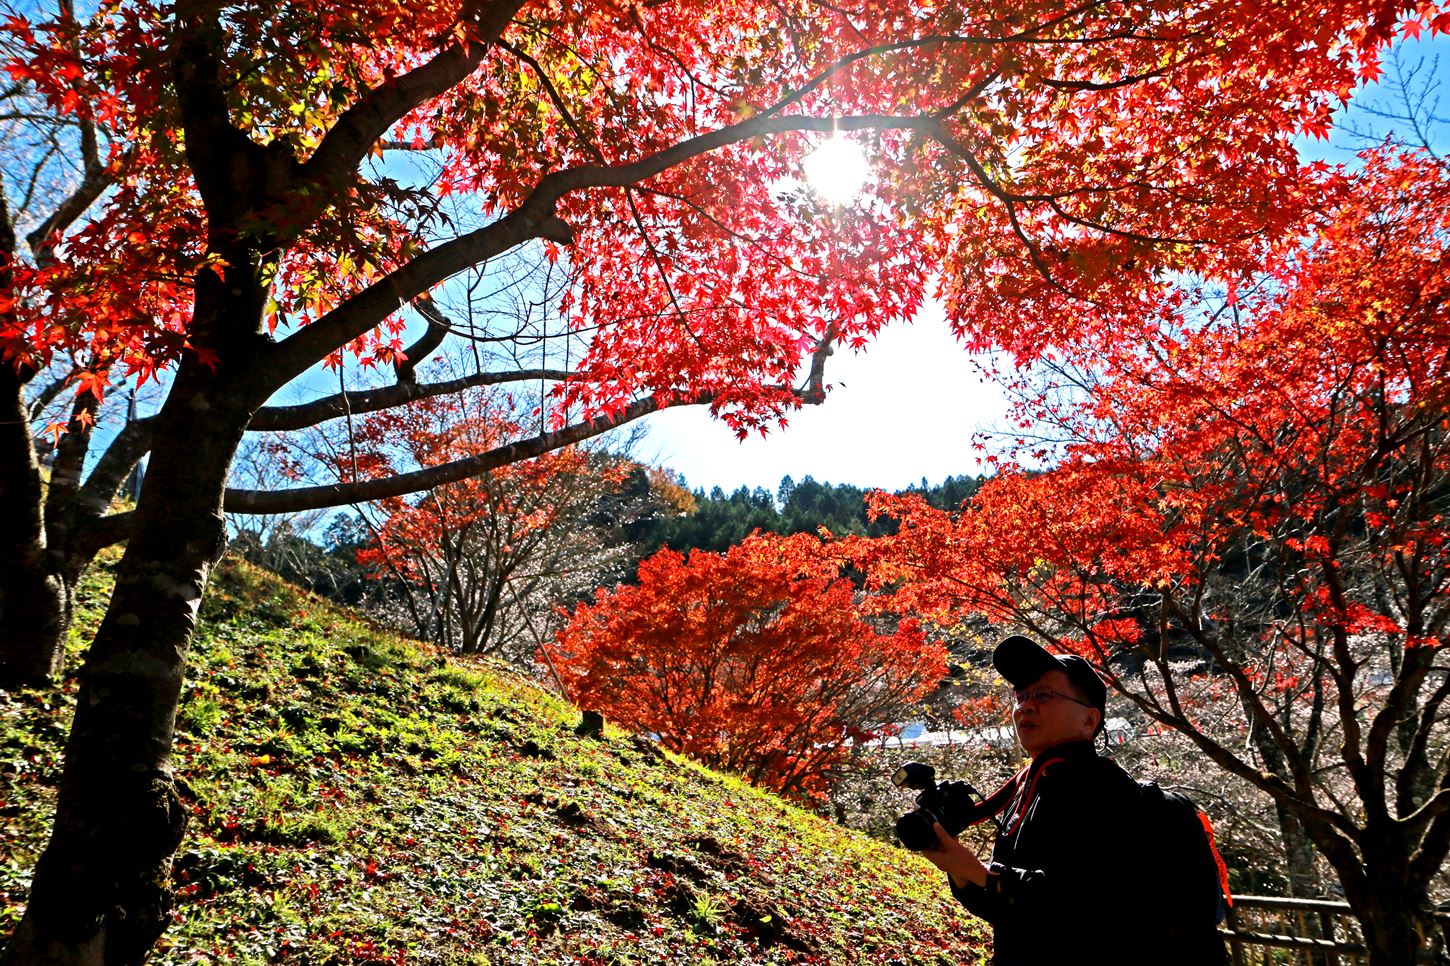 Sightseeing scenery that simply shows the weather in Sendai in November5